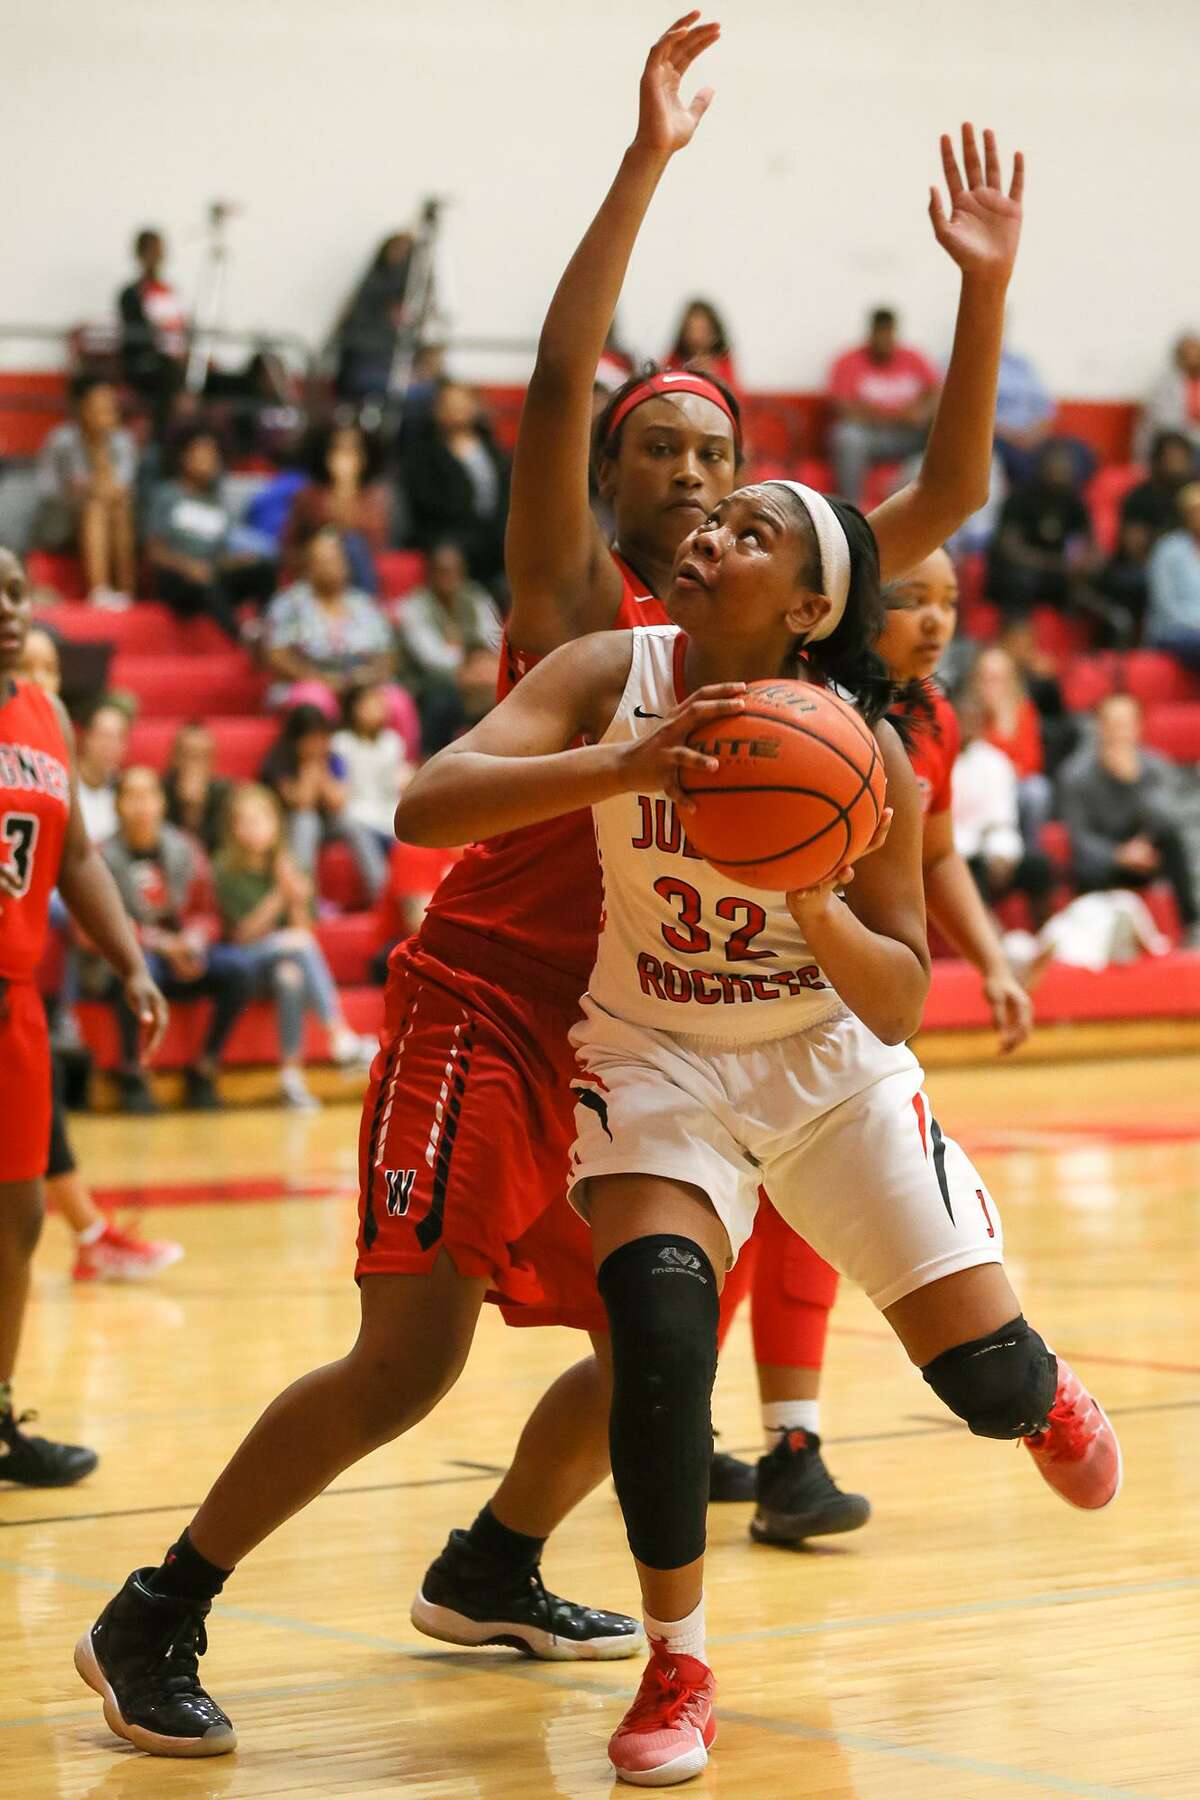 Judson’s Desiree Lewis (front) tries to drive past Wagner’s Da’Nasia Hool during the second half of a District 27-6A game at Judson on Jan. 10, 2017.